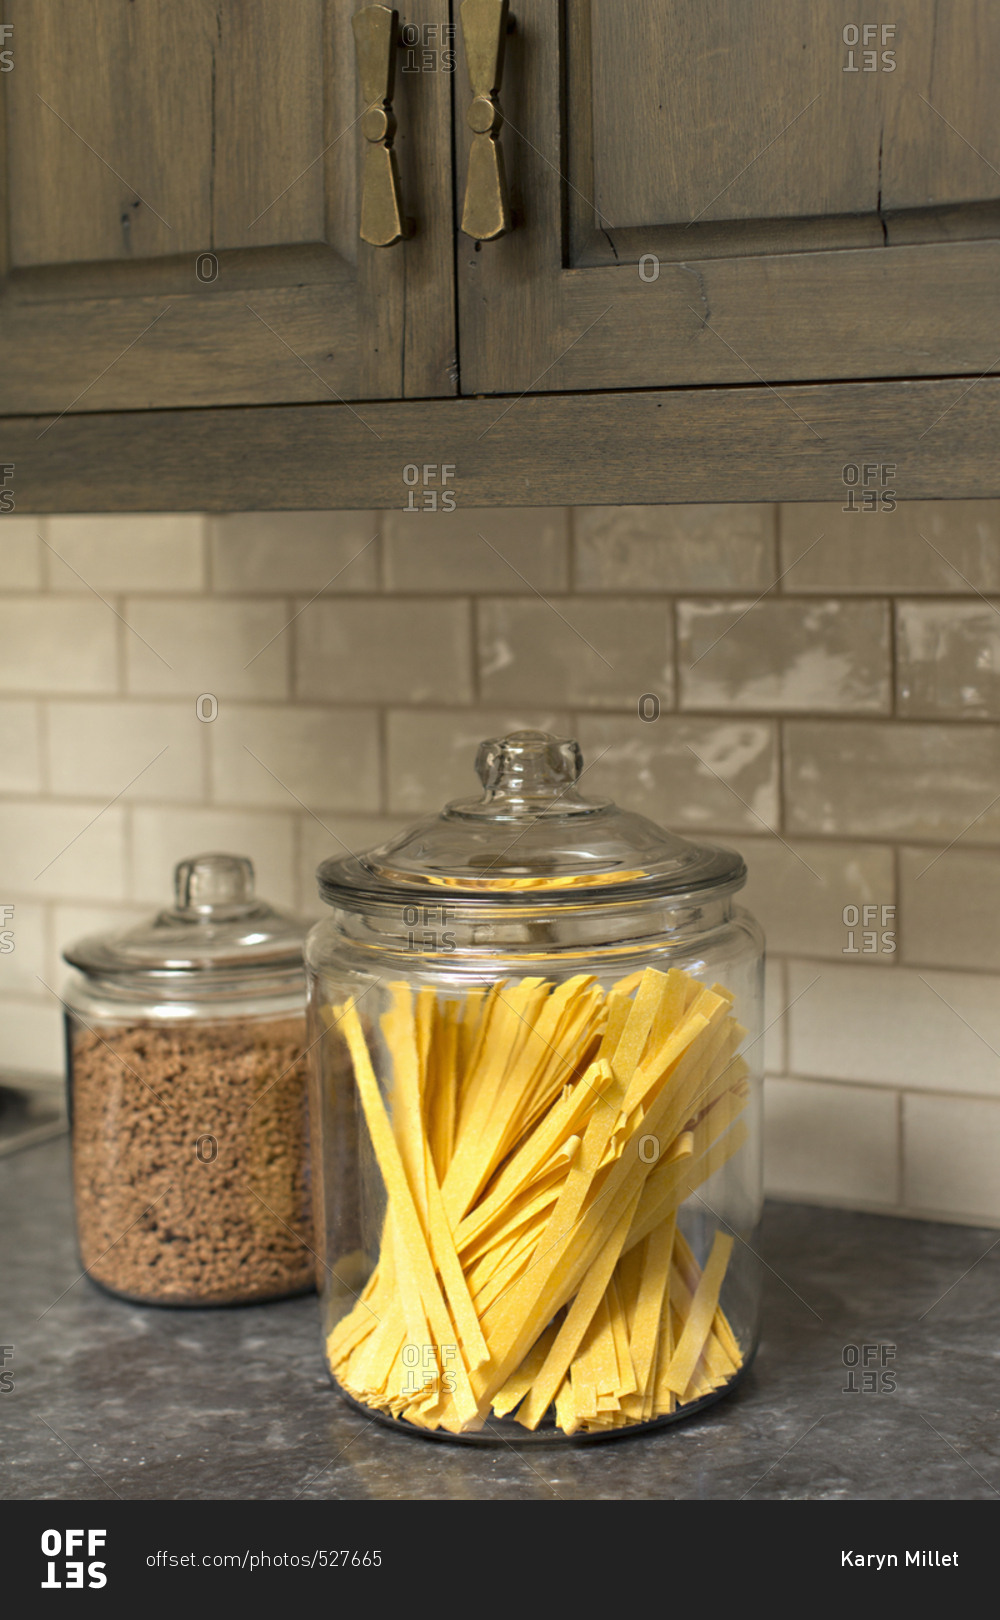 Dried noodles in glass canister on counter